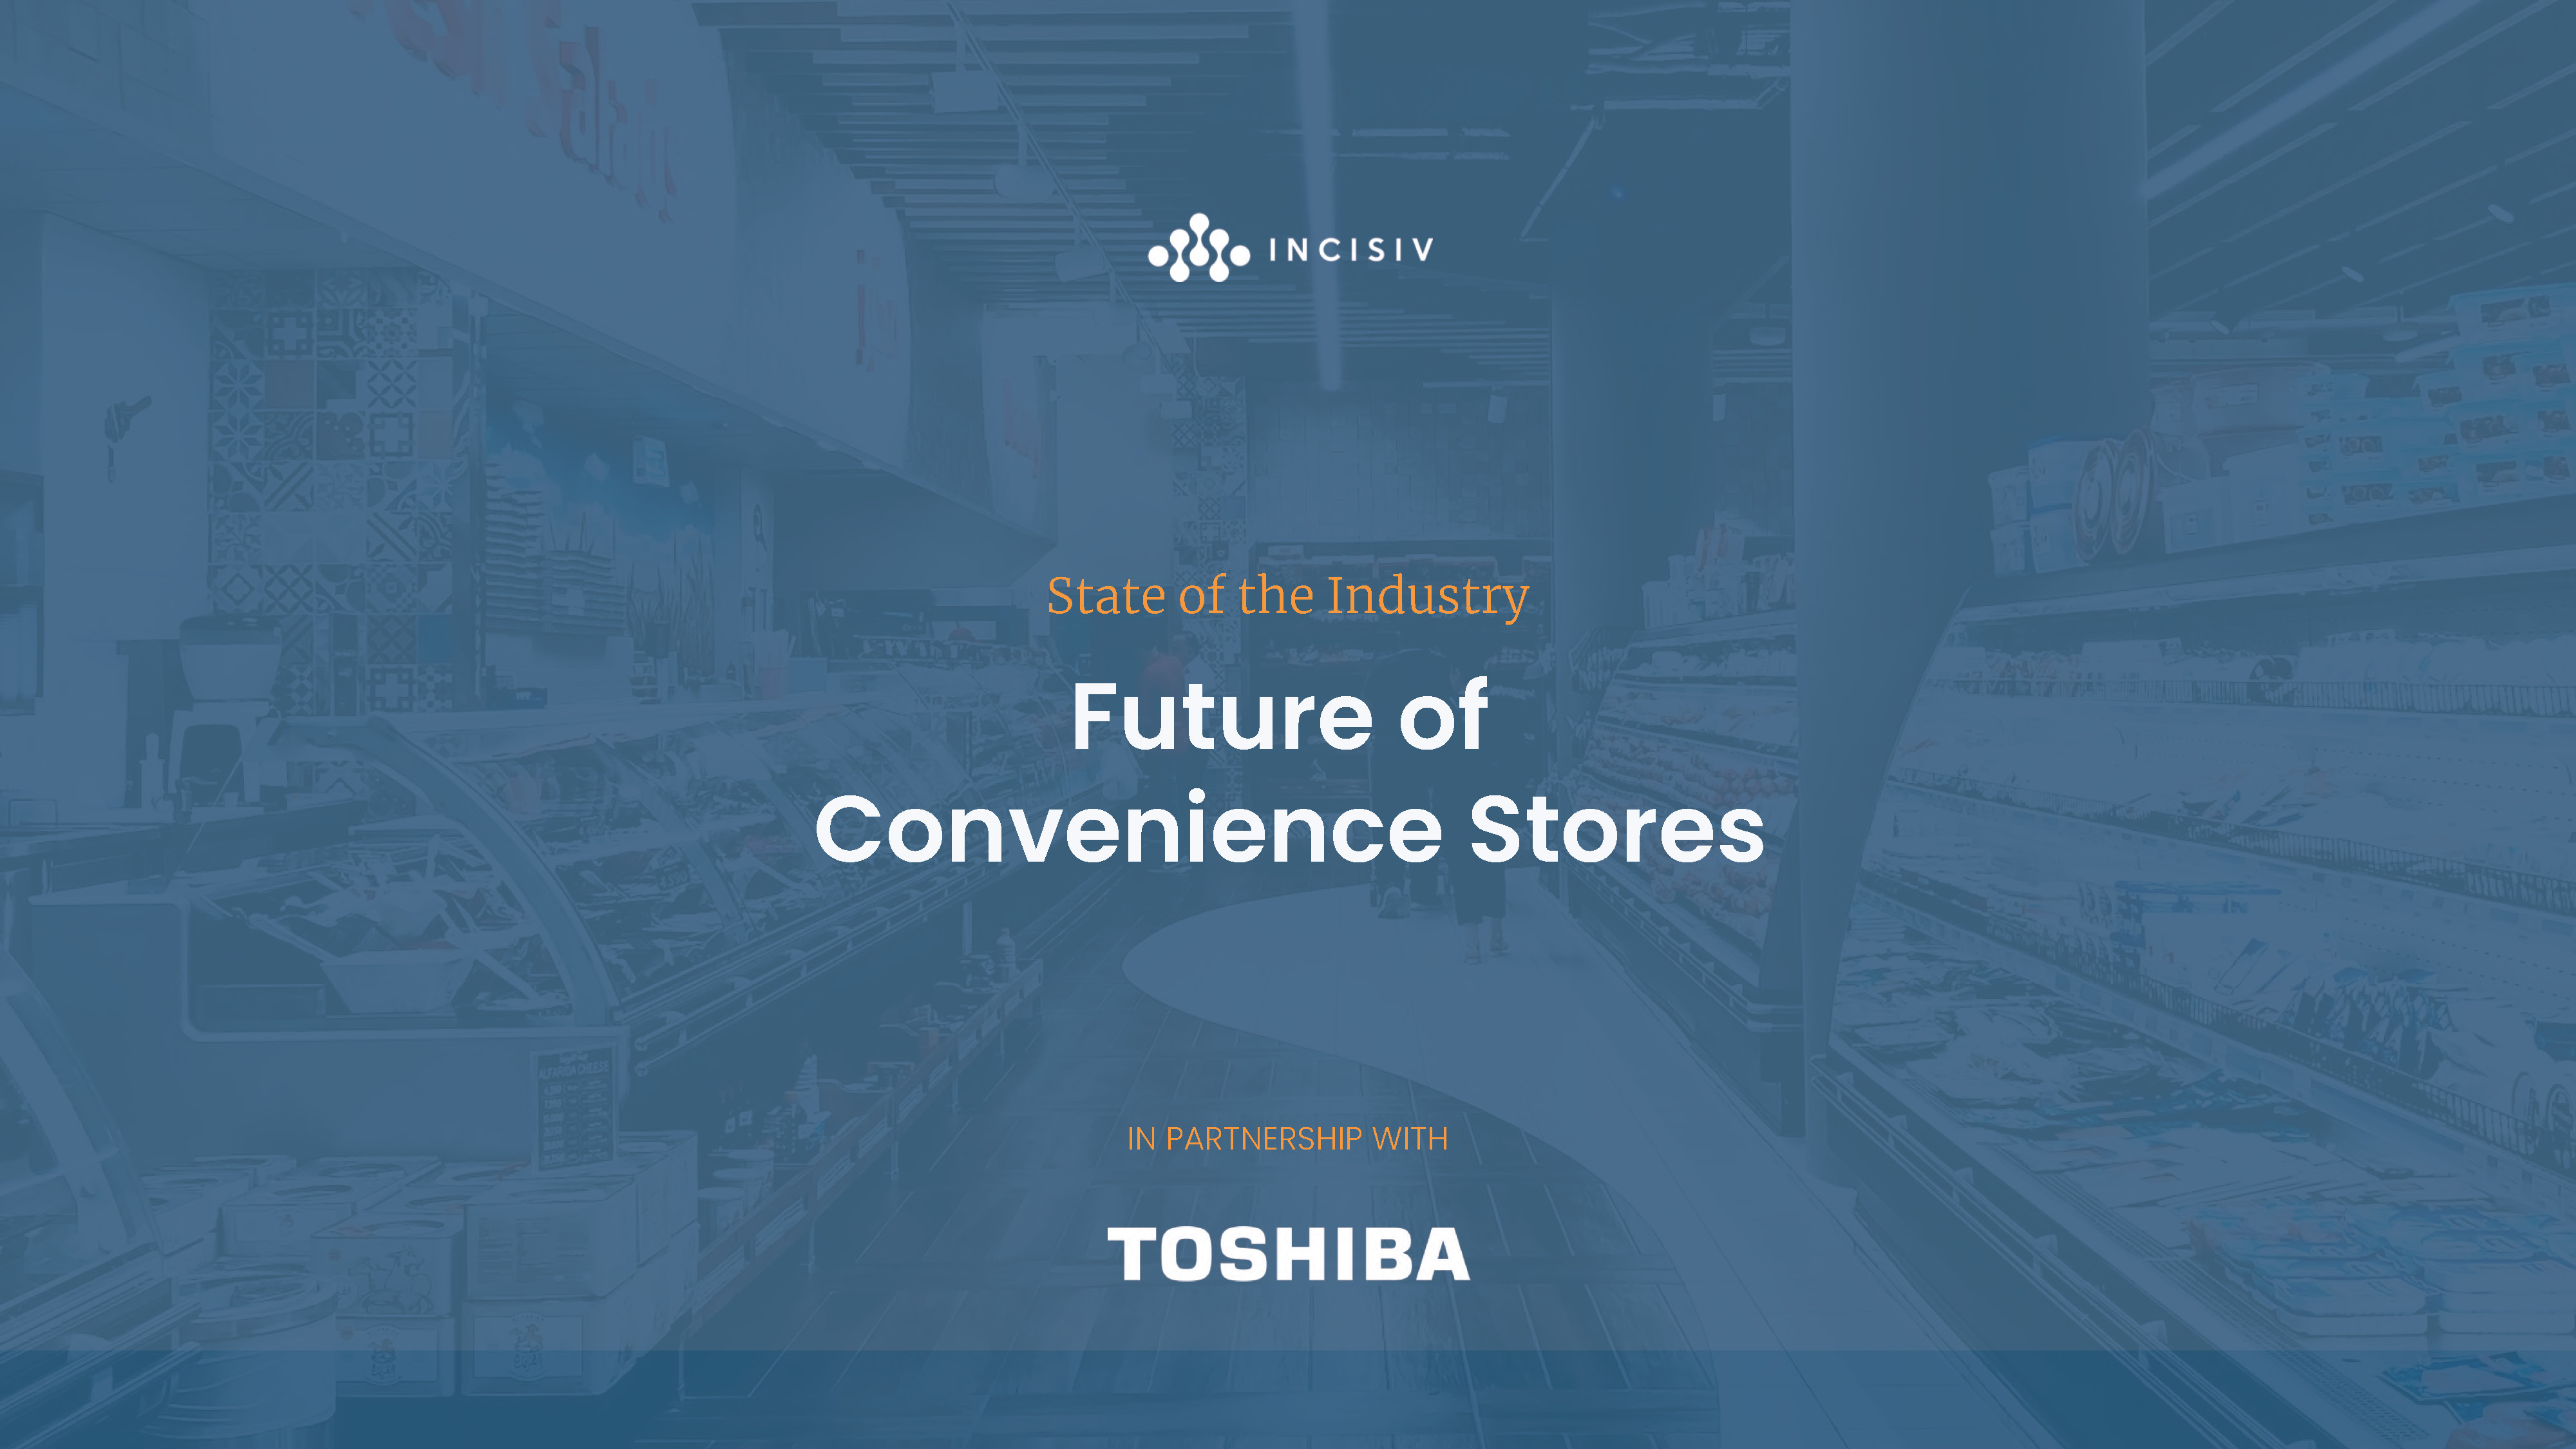 Future of Convenience Stores